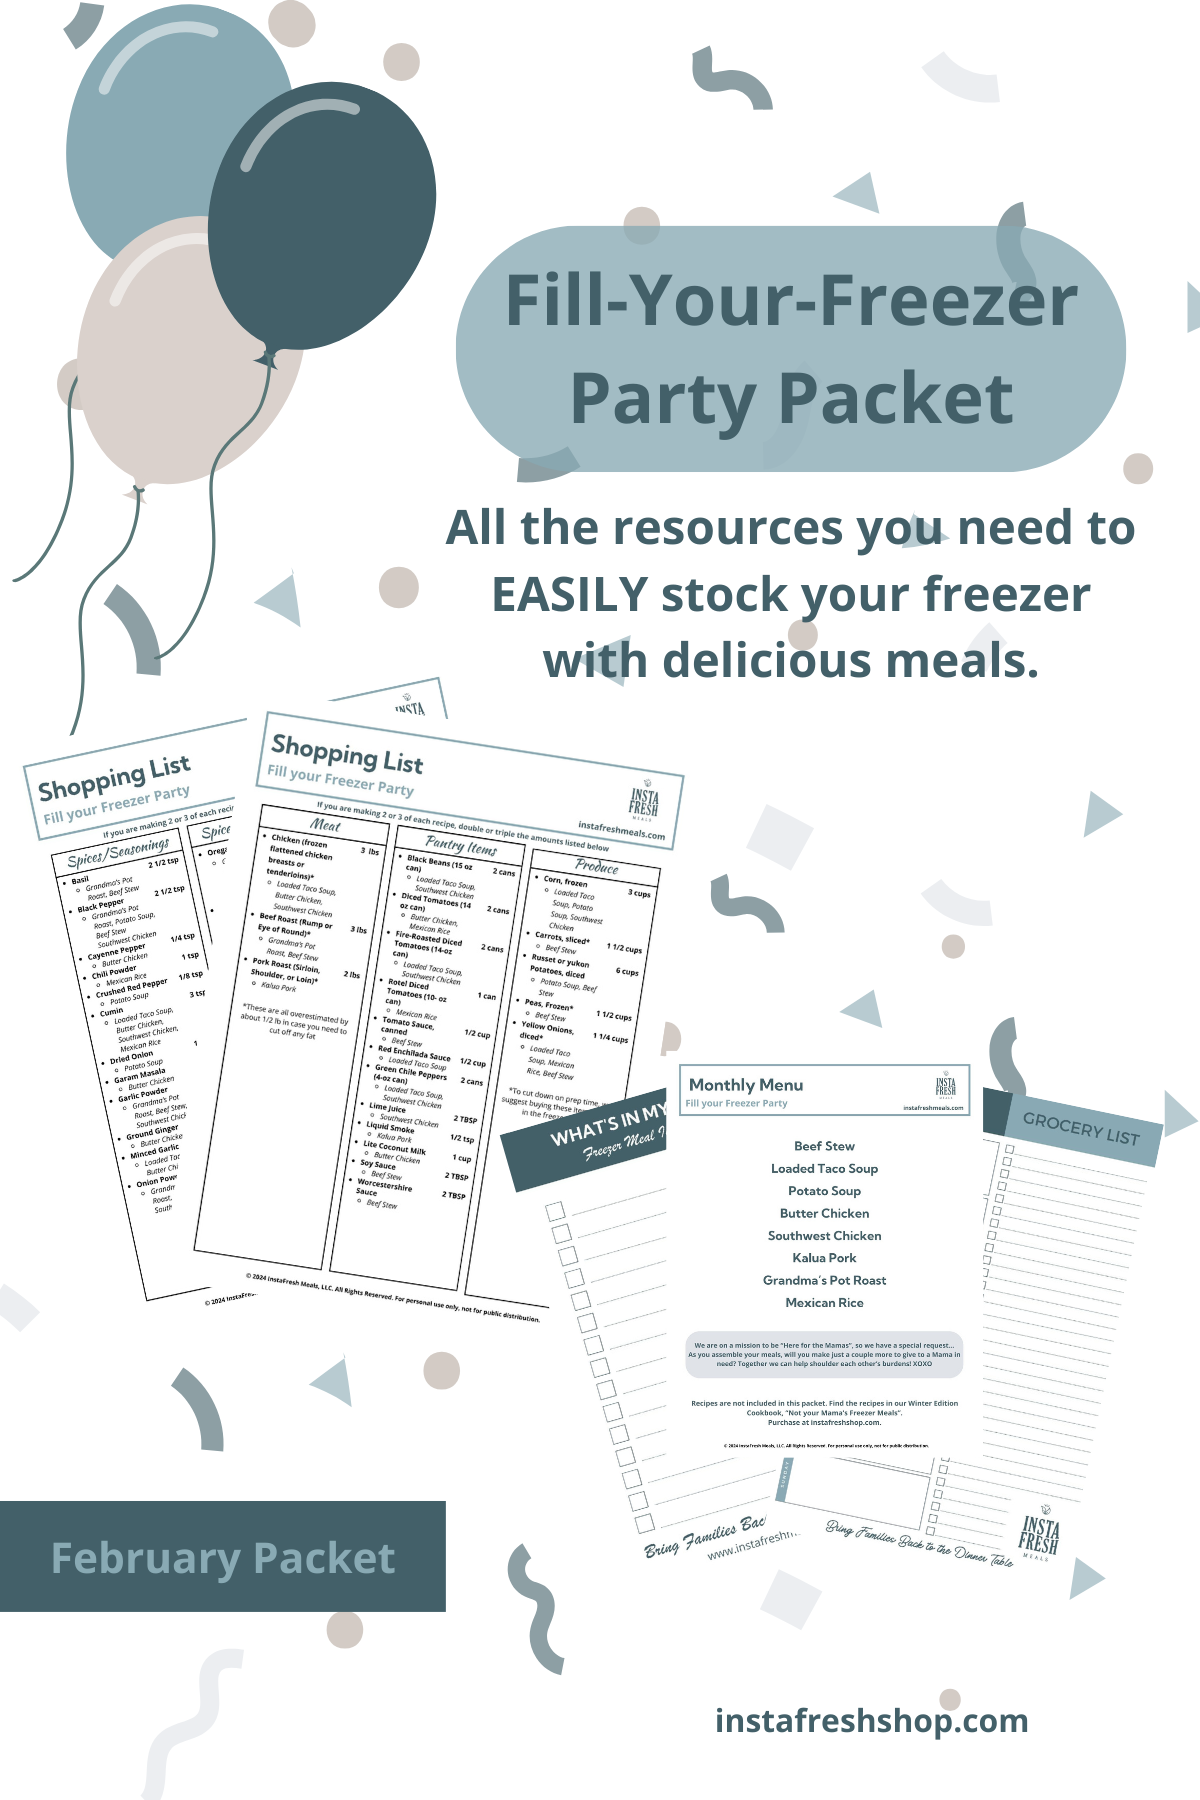 Fill-Your-Freezer Party Packet - FEBRUARY MENU